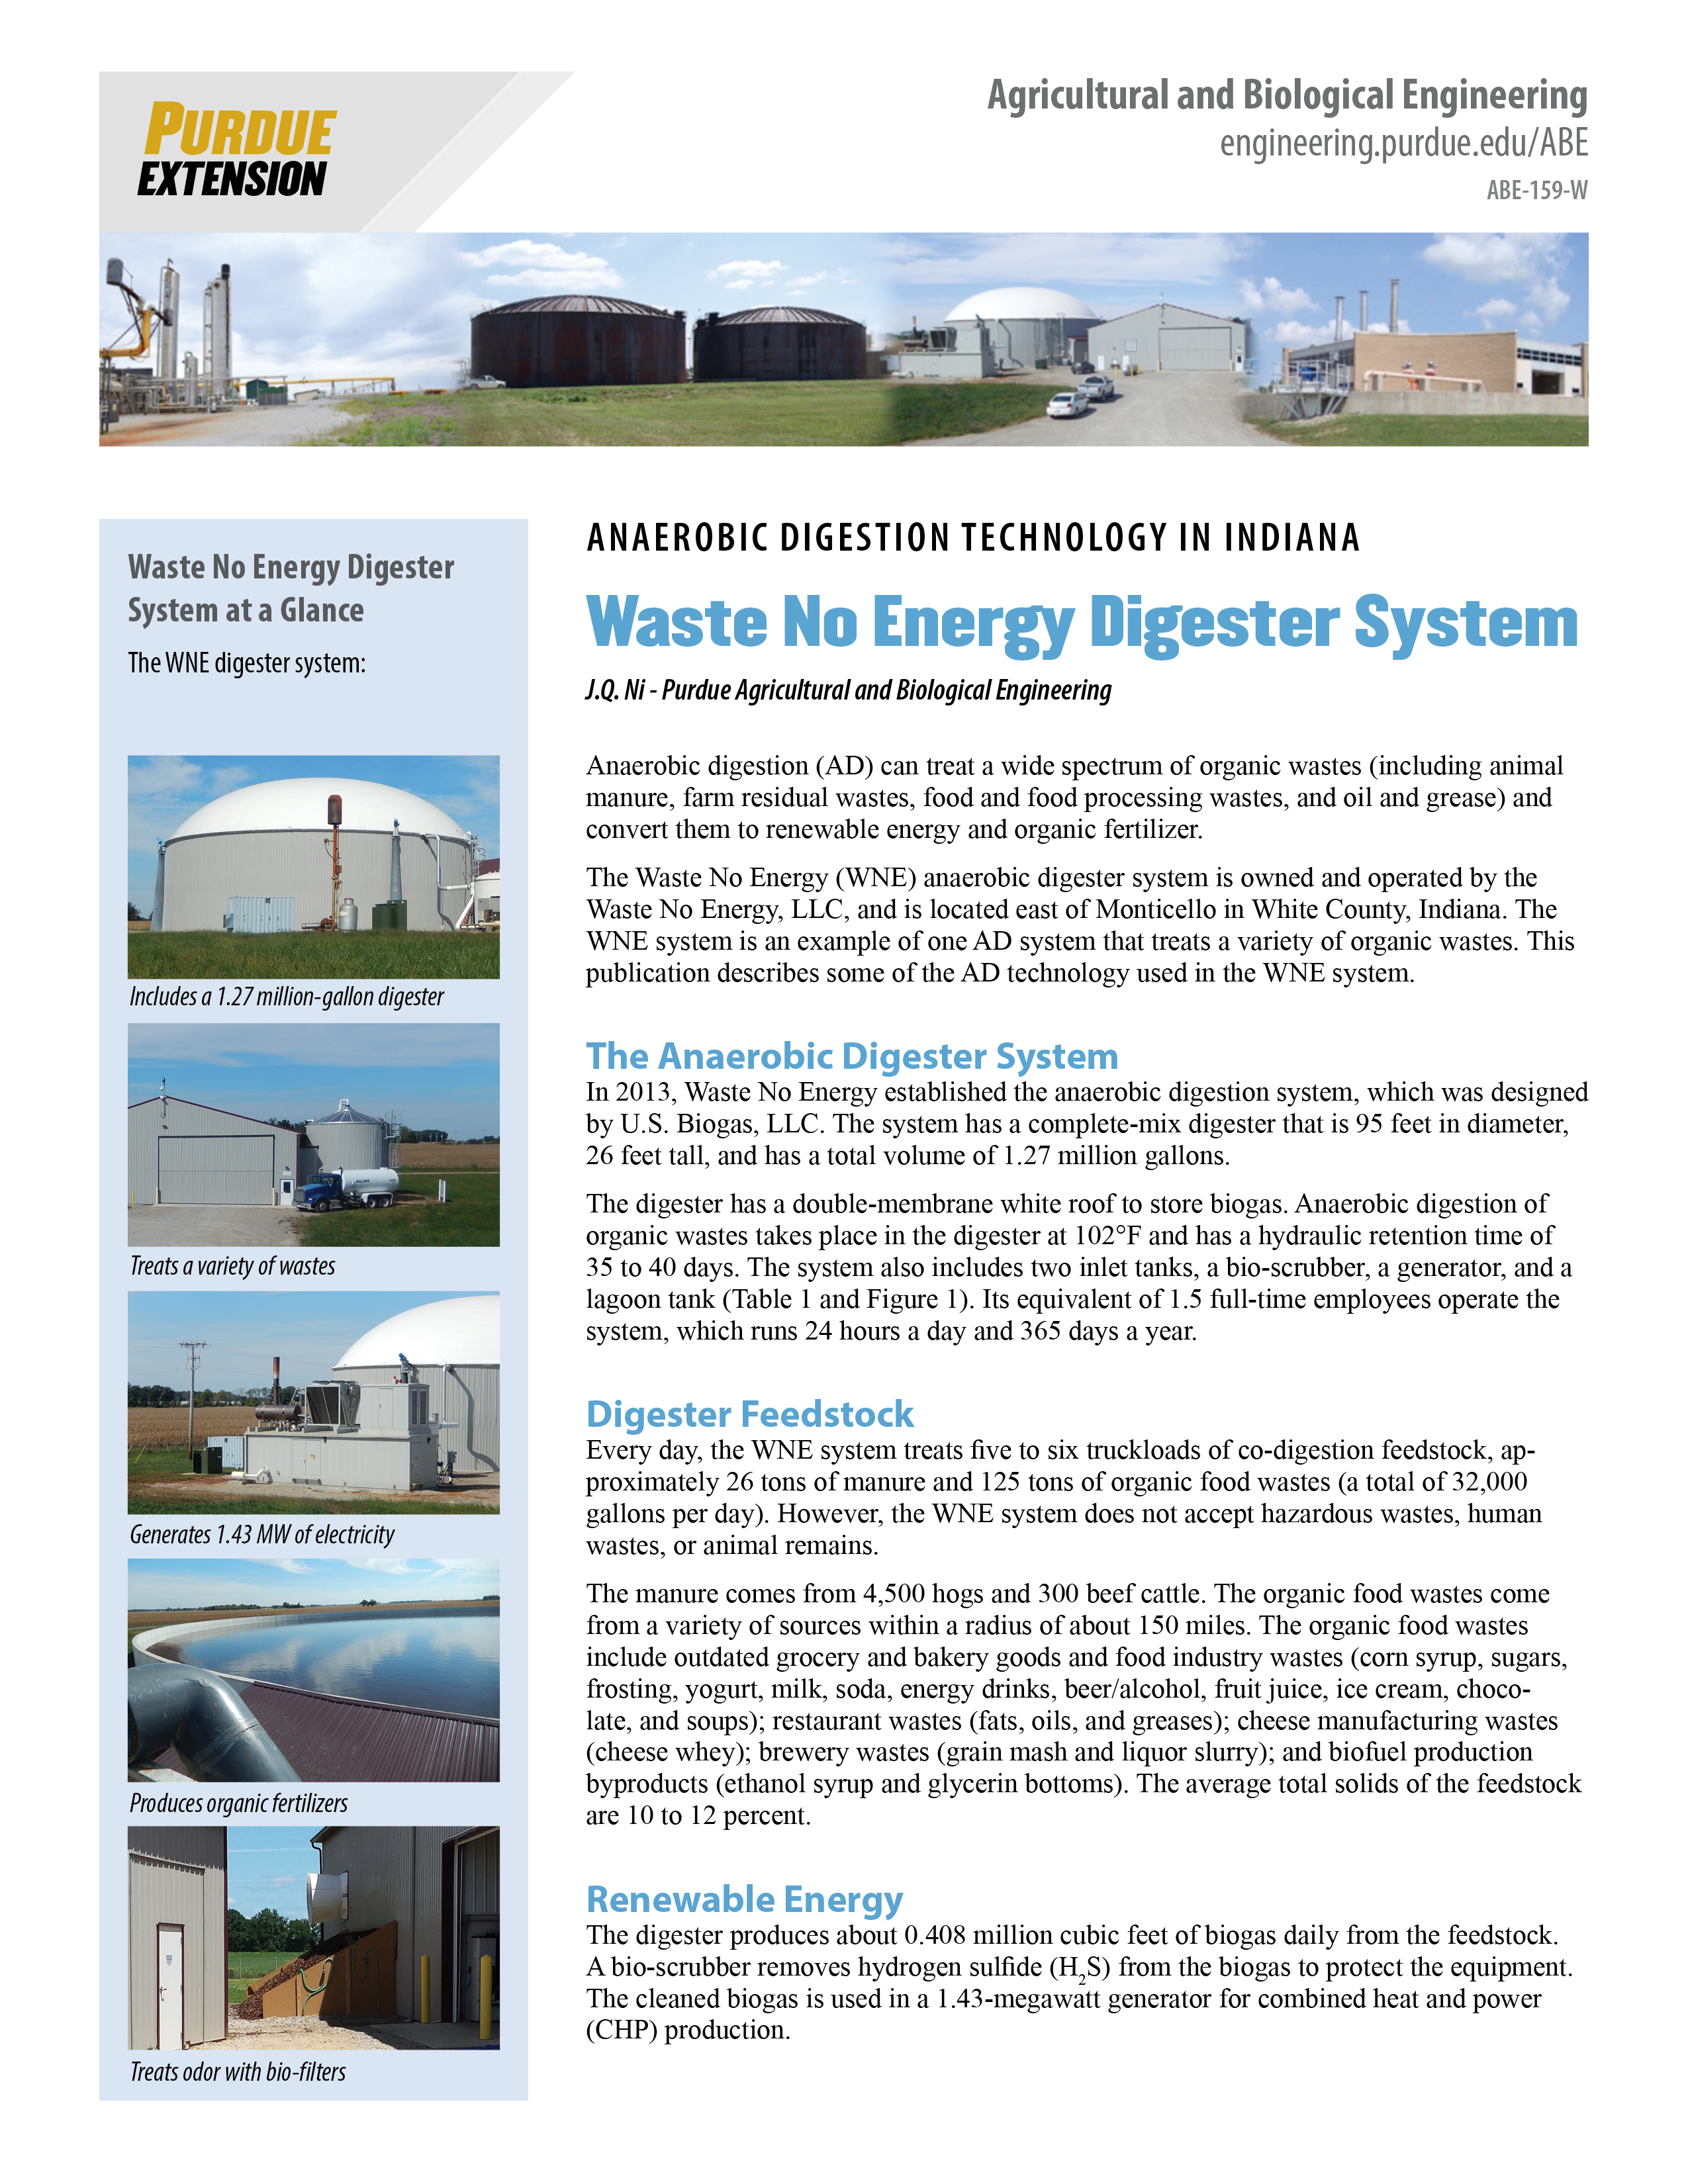 Anaerobic Digestion Technology: Waste No Energy